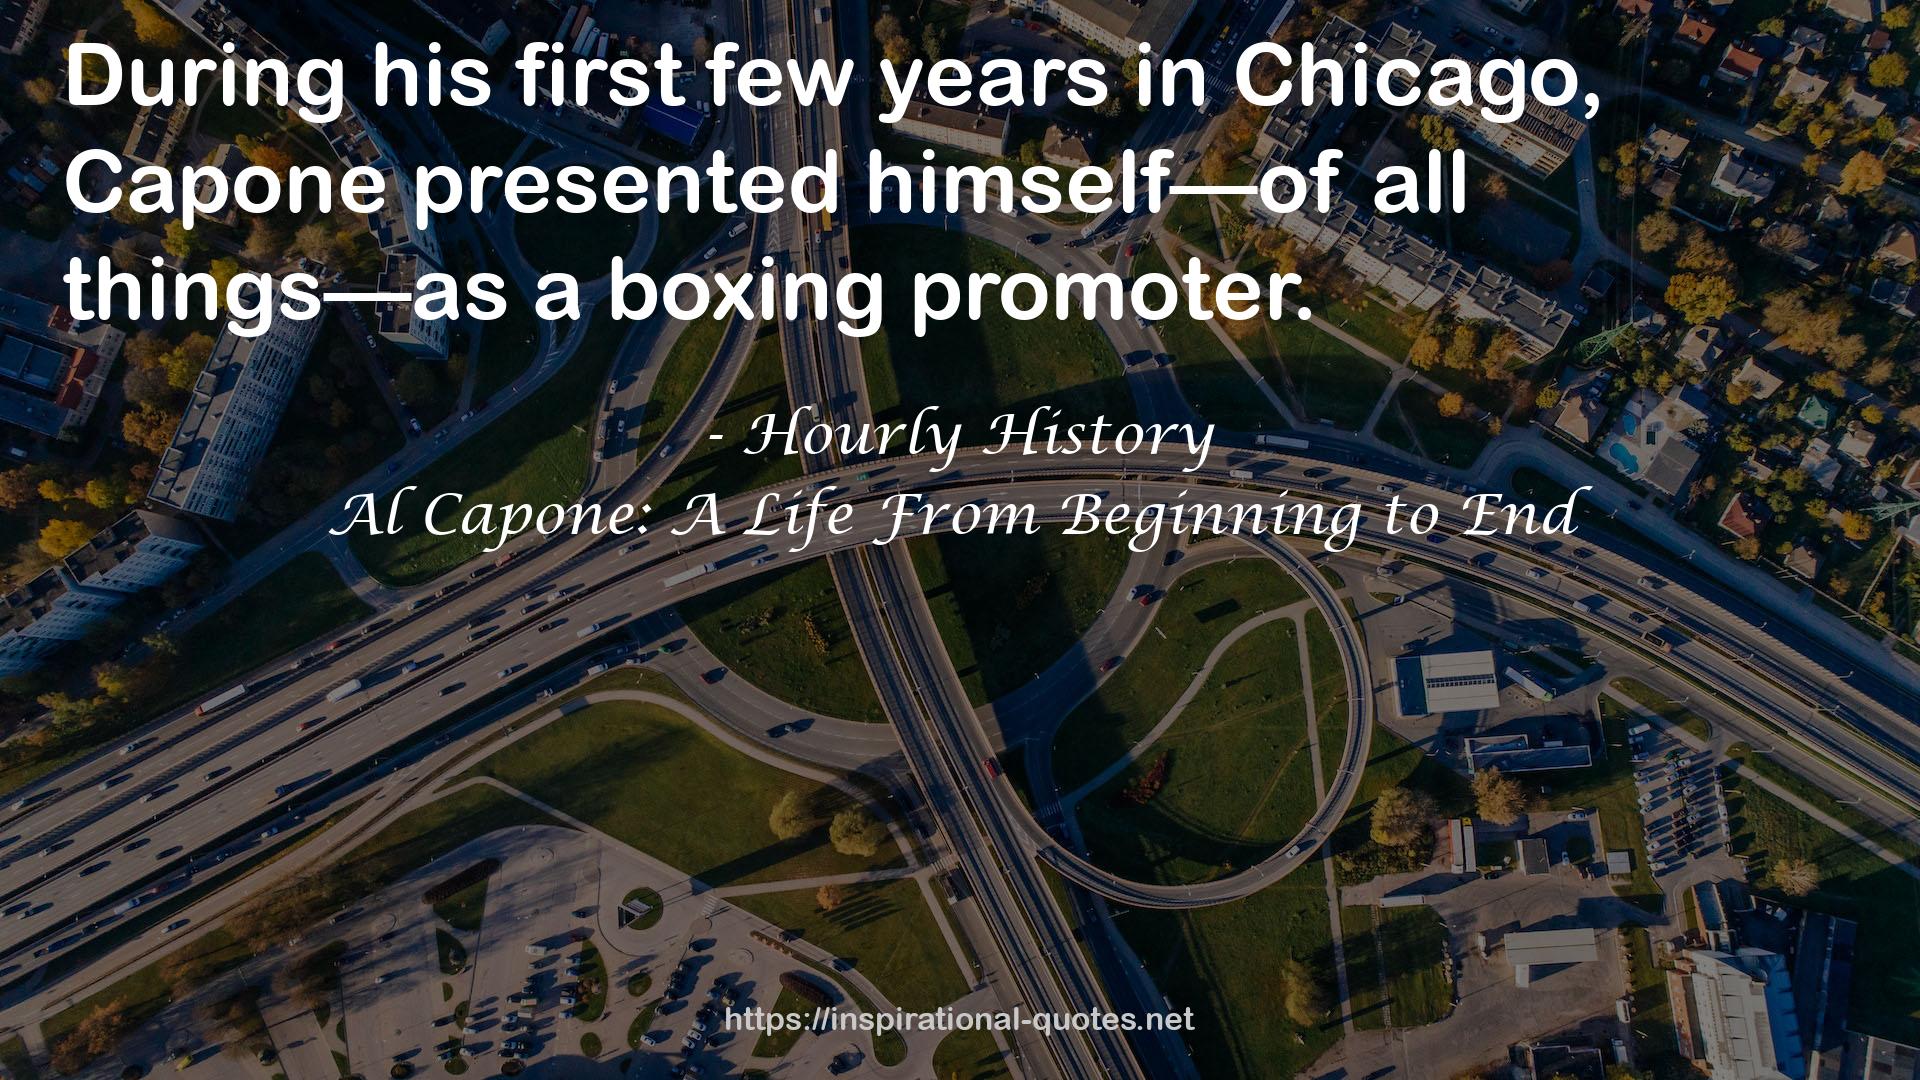 Al Capone: A Life From Beginning to End QUOTES